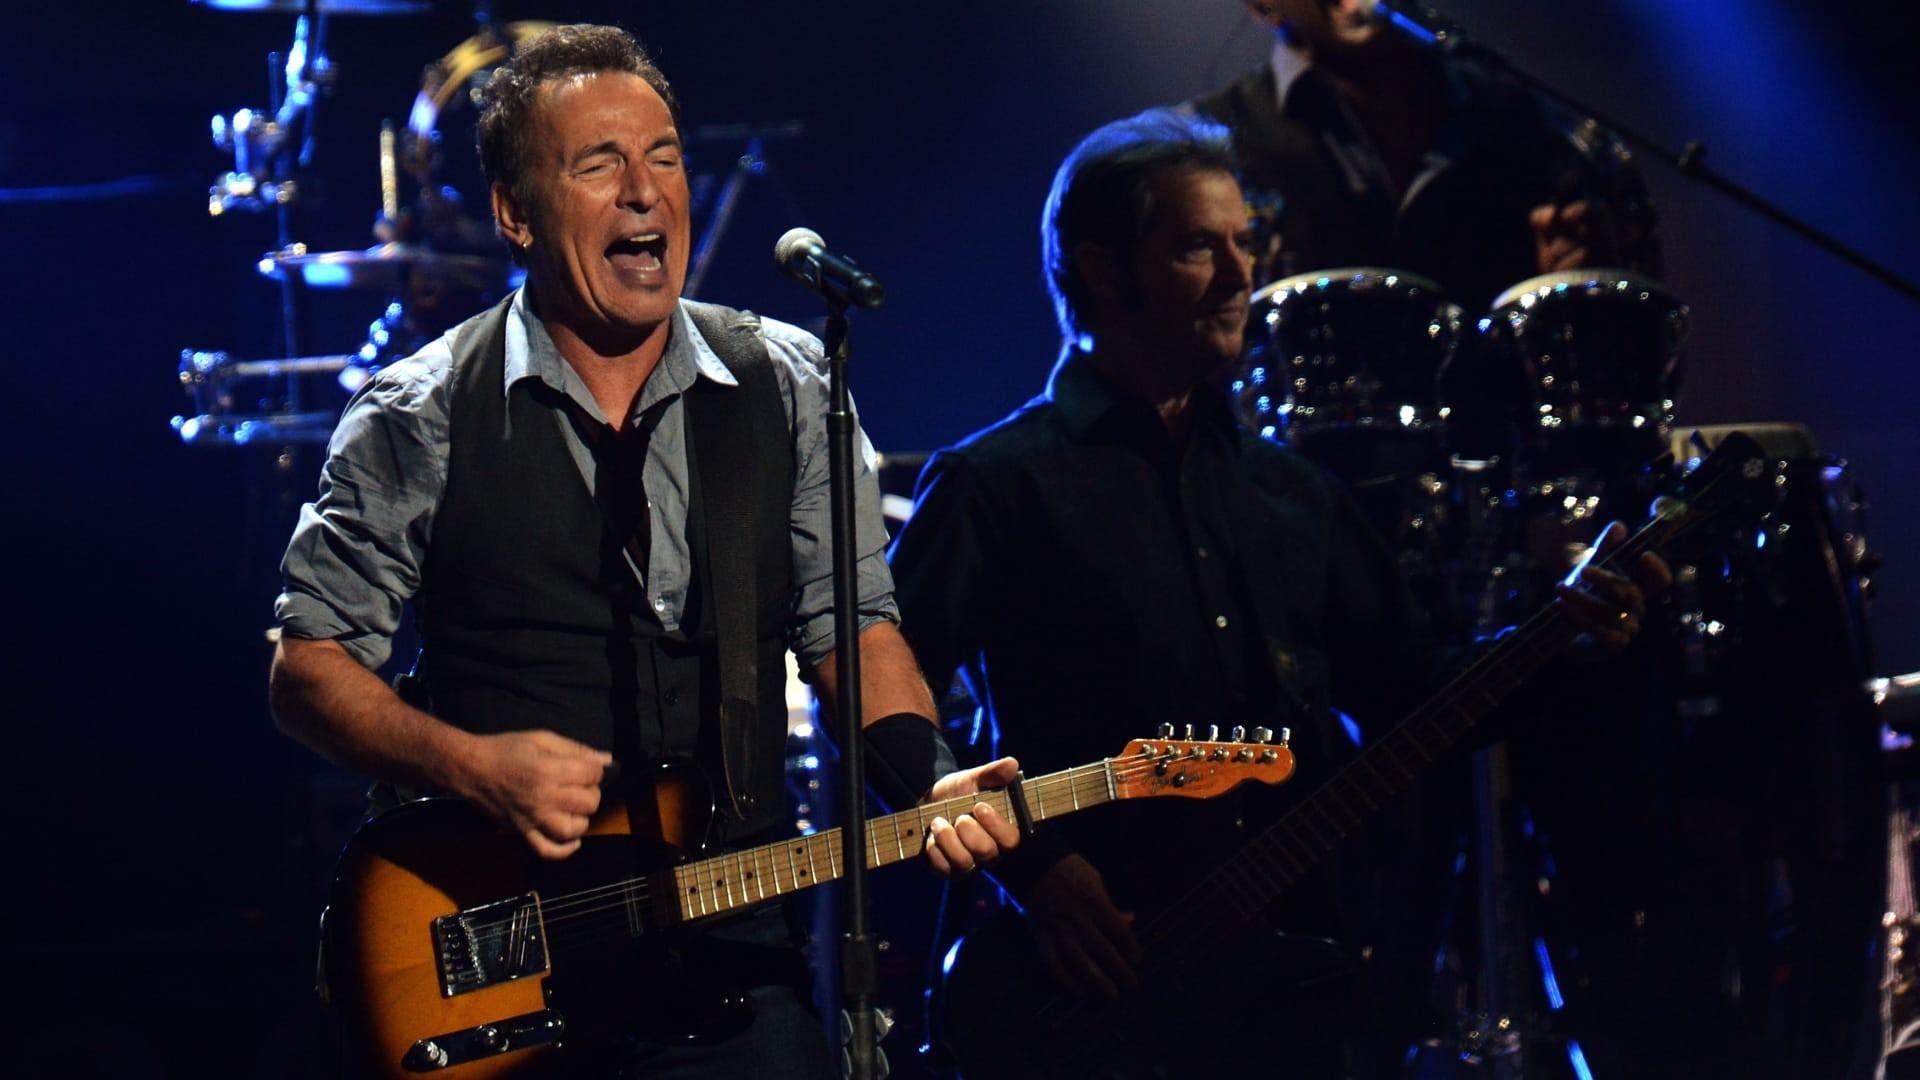 A MusiCares Tribute to Bruce Springsteen